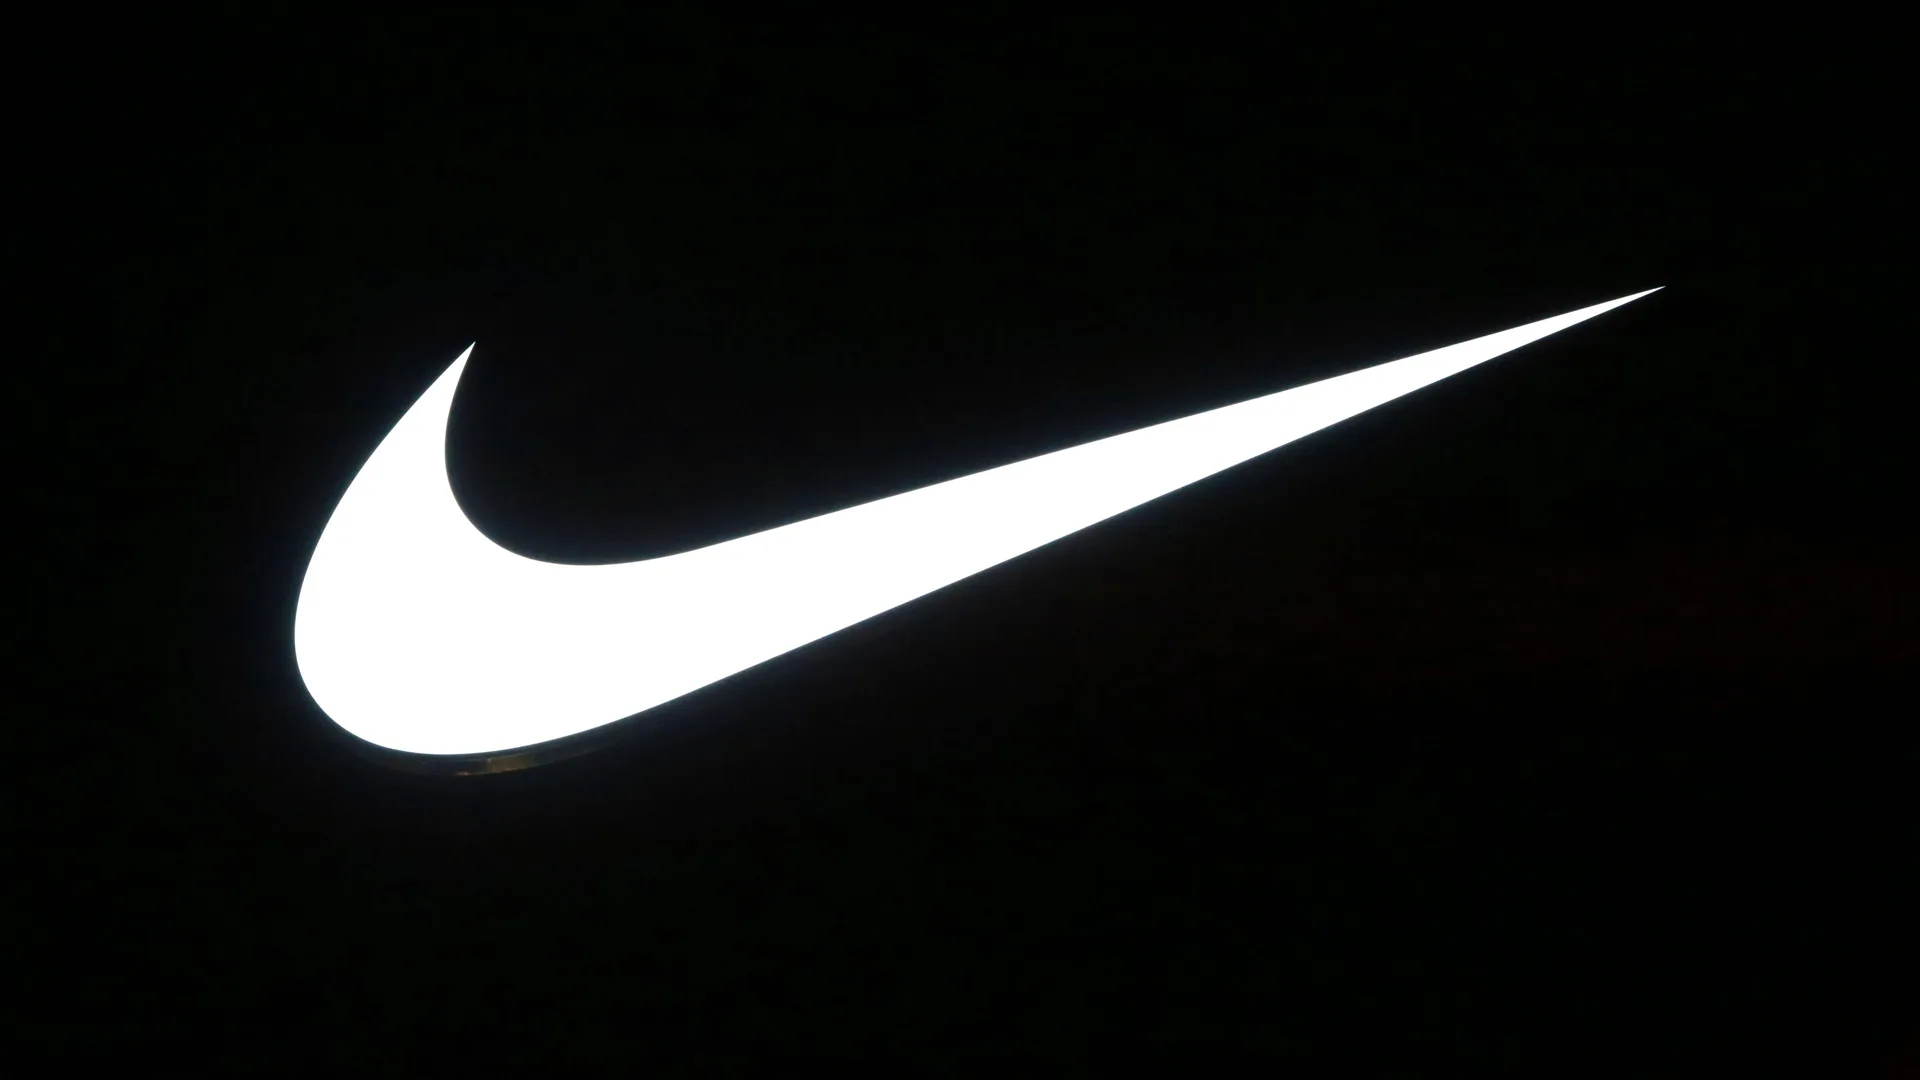 The Nike tick logo in black and white